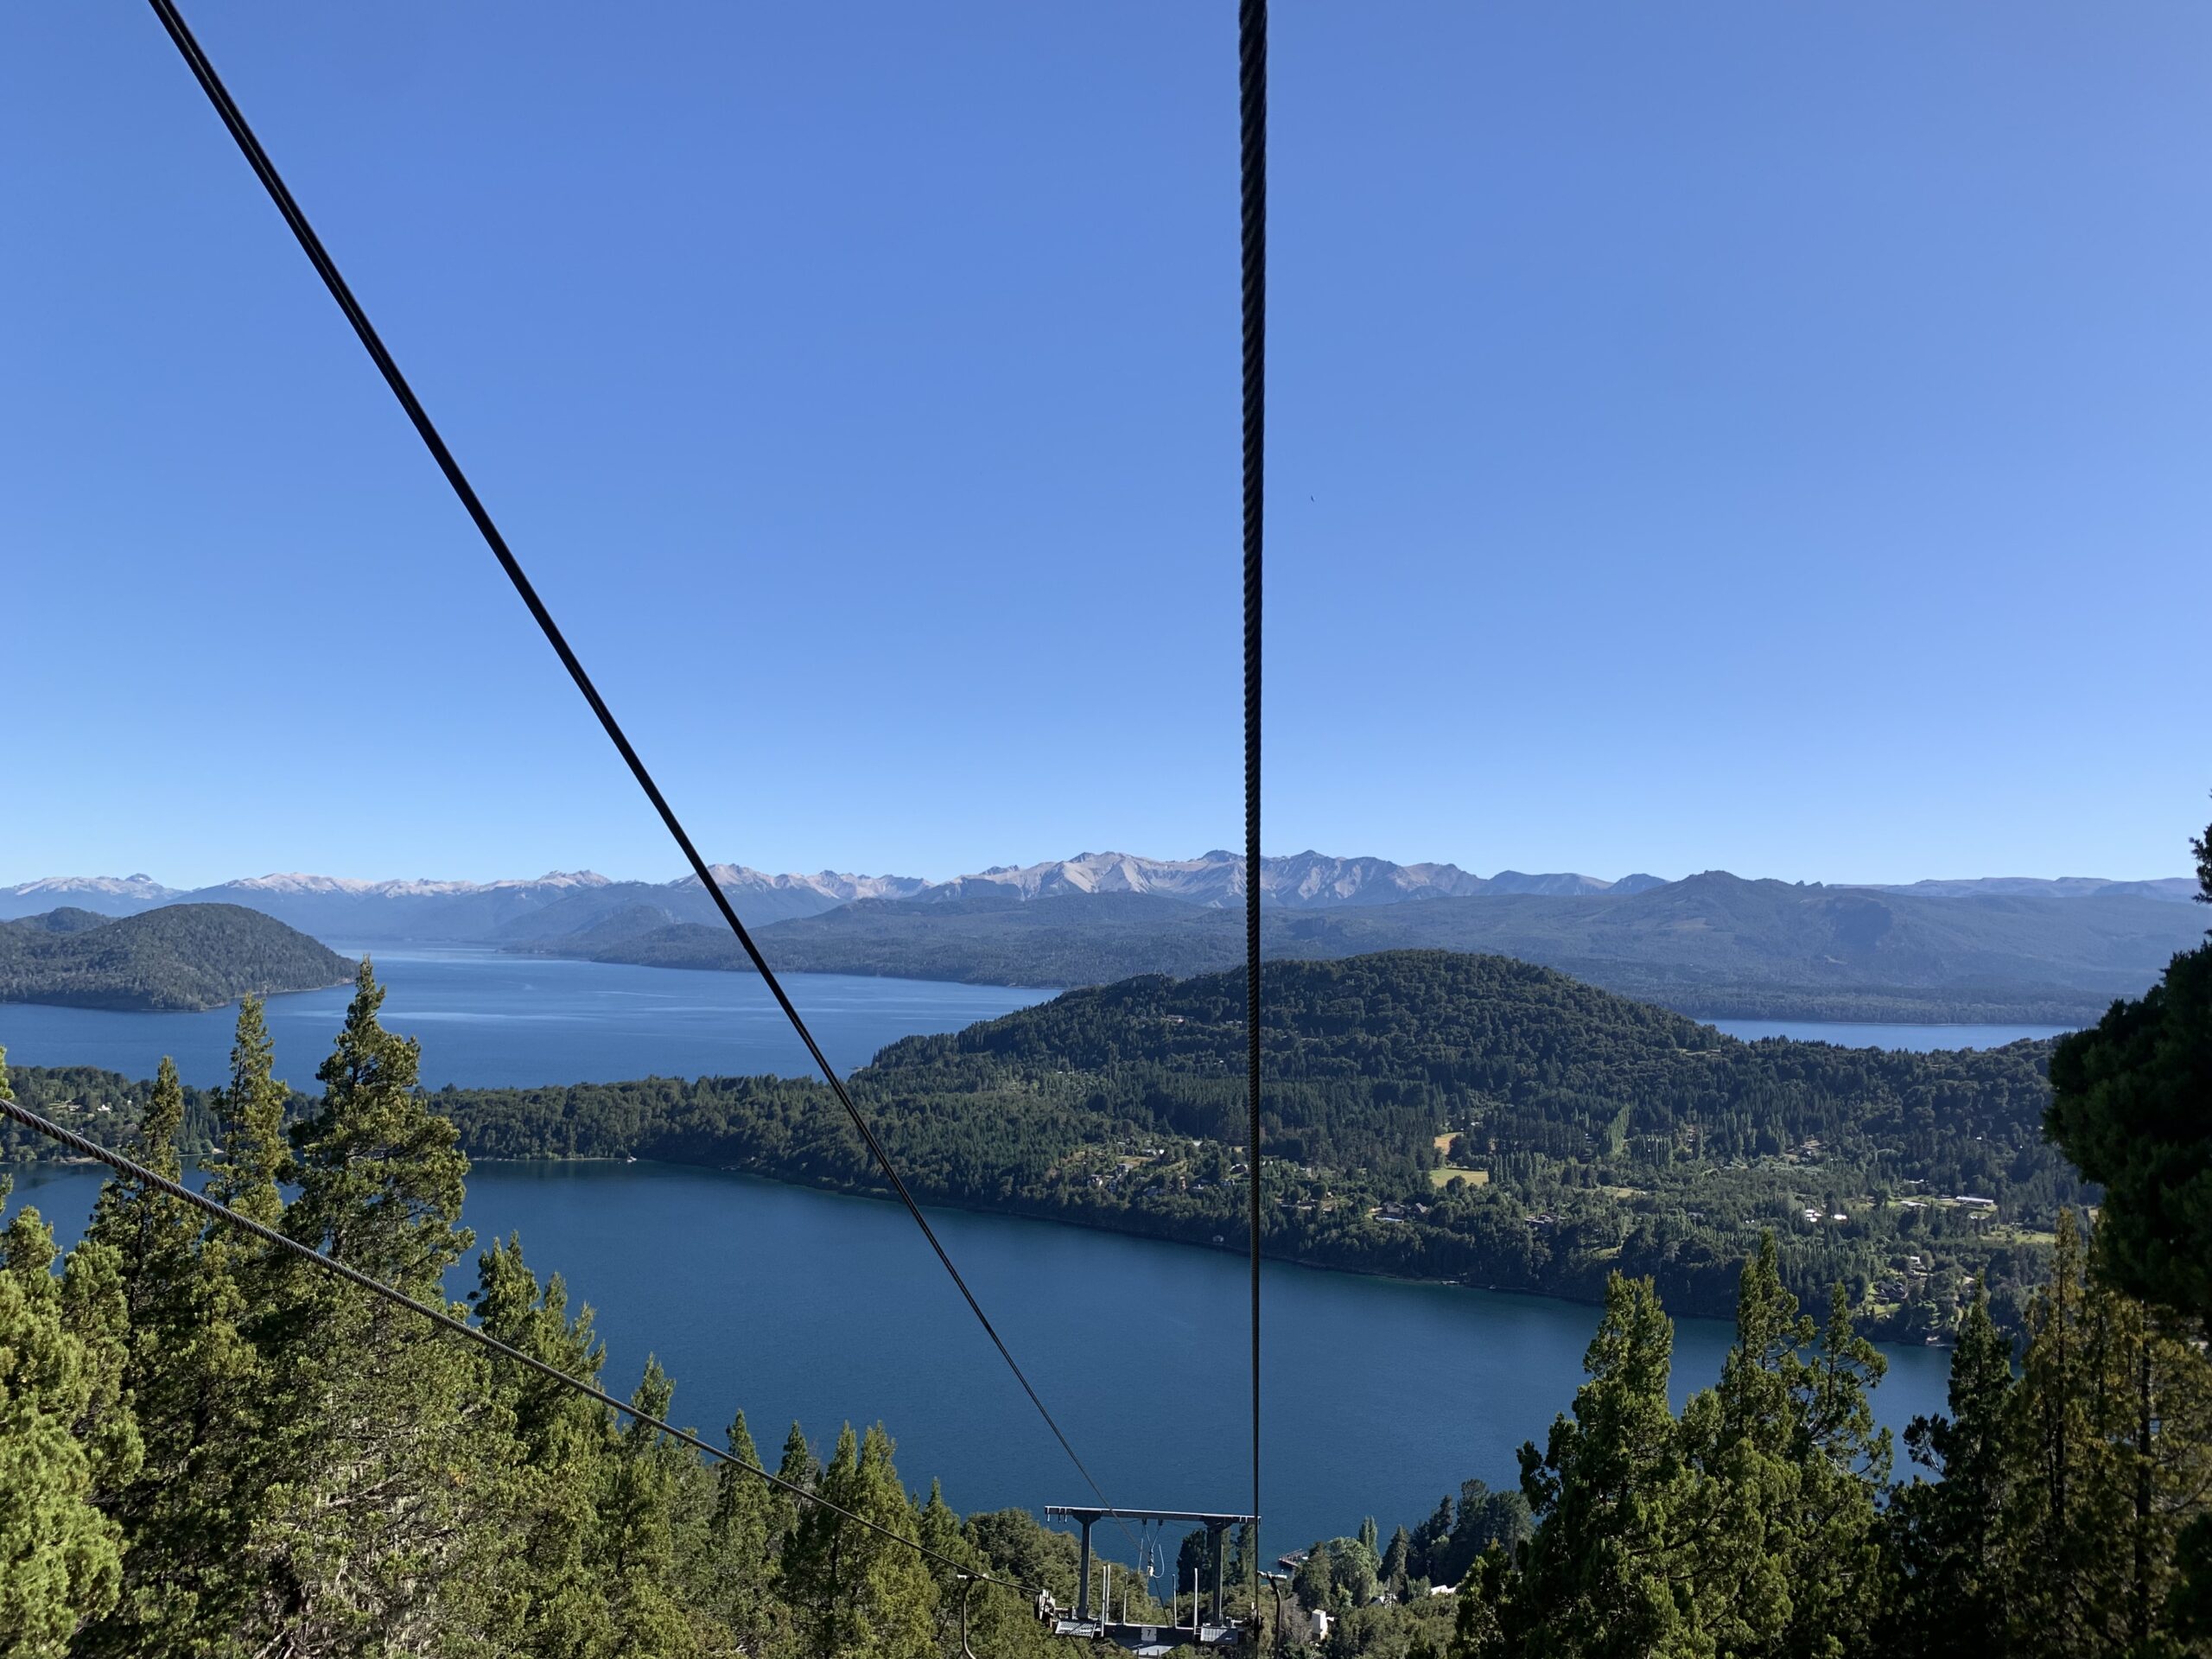 Chairlift with scenic views - Bariloche, Argentina